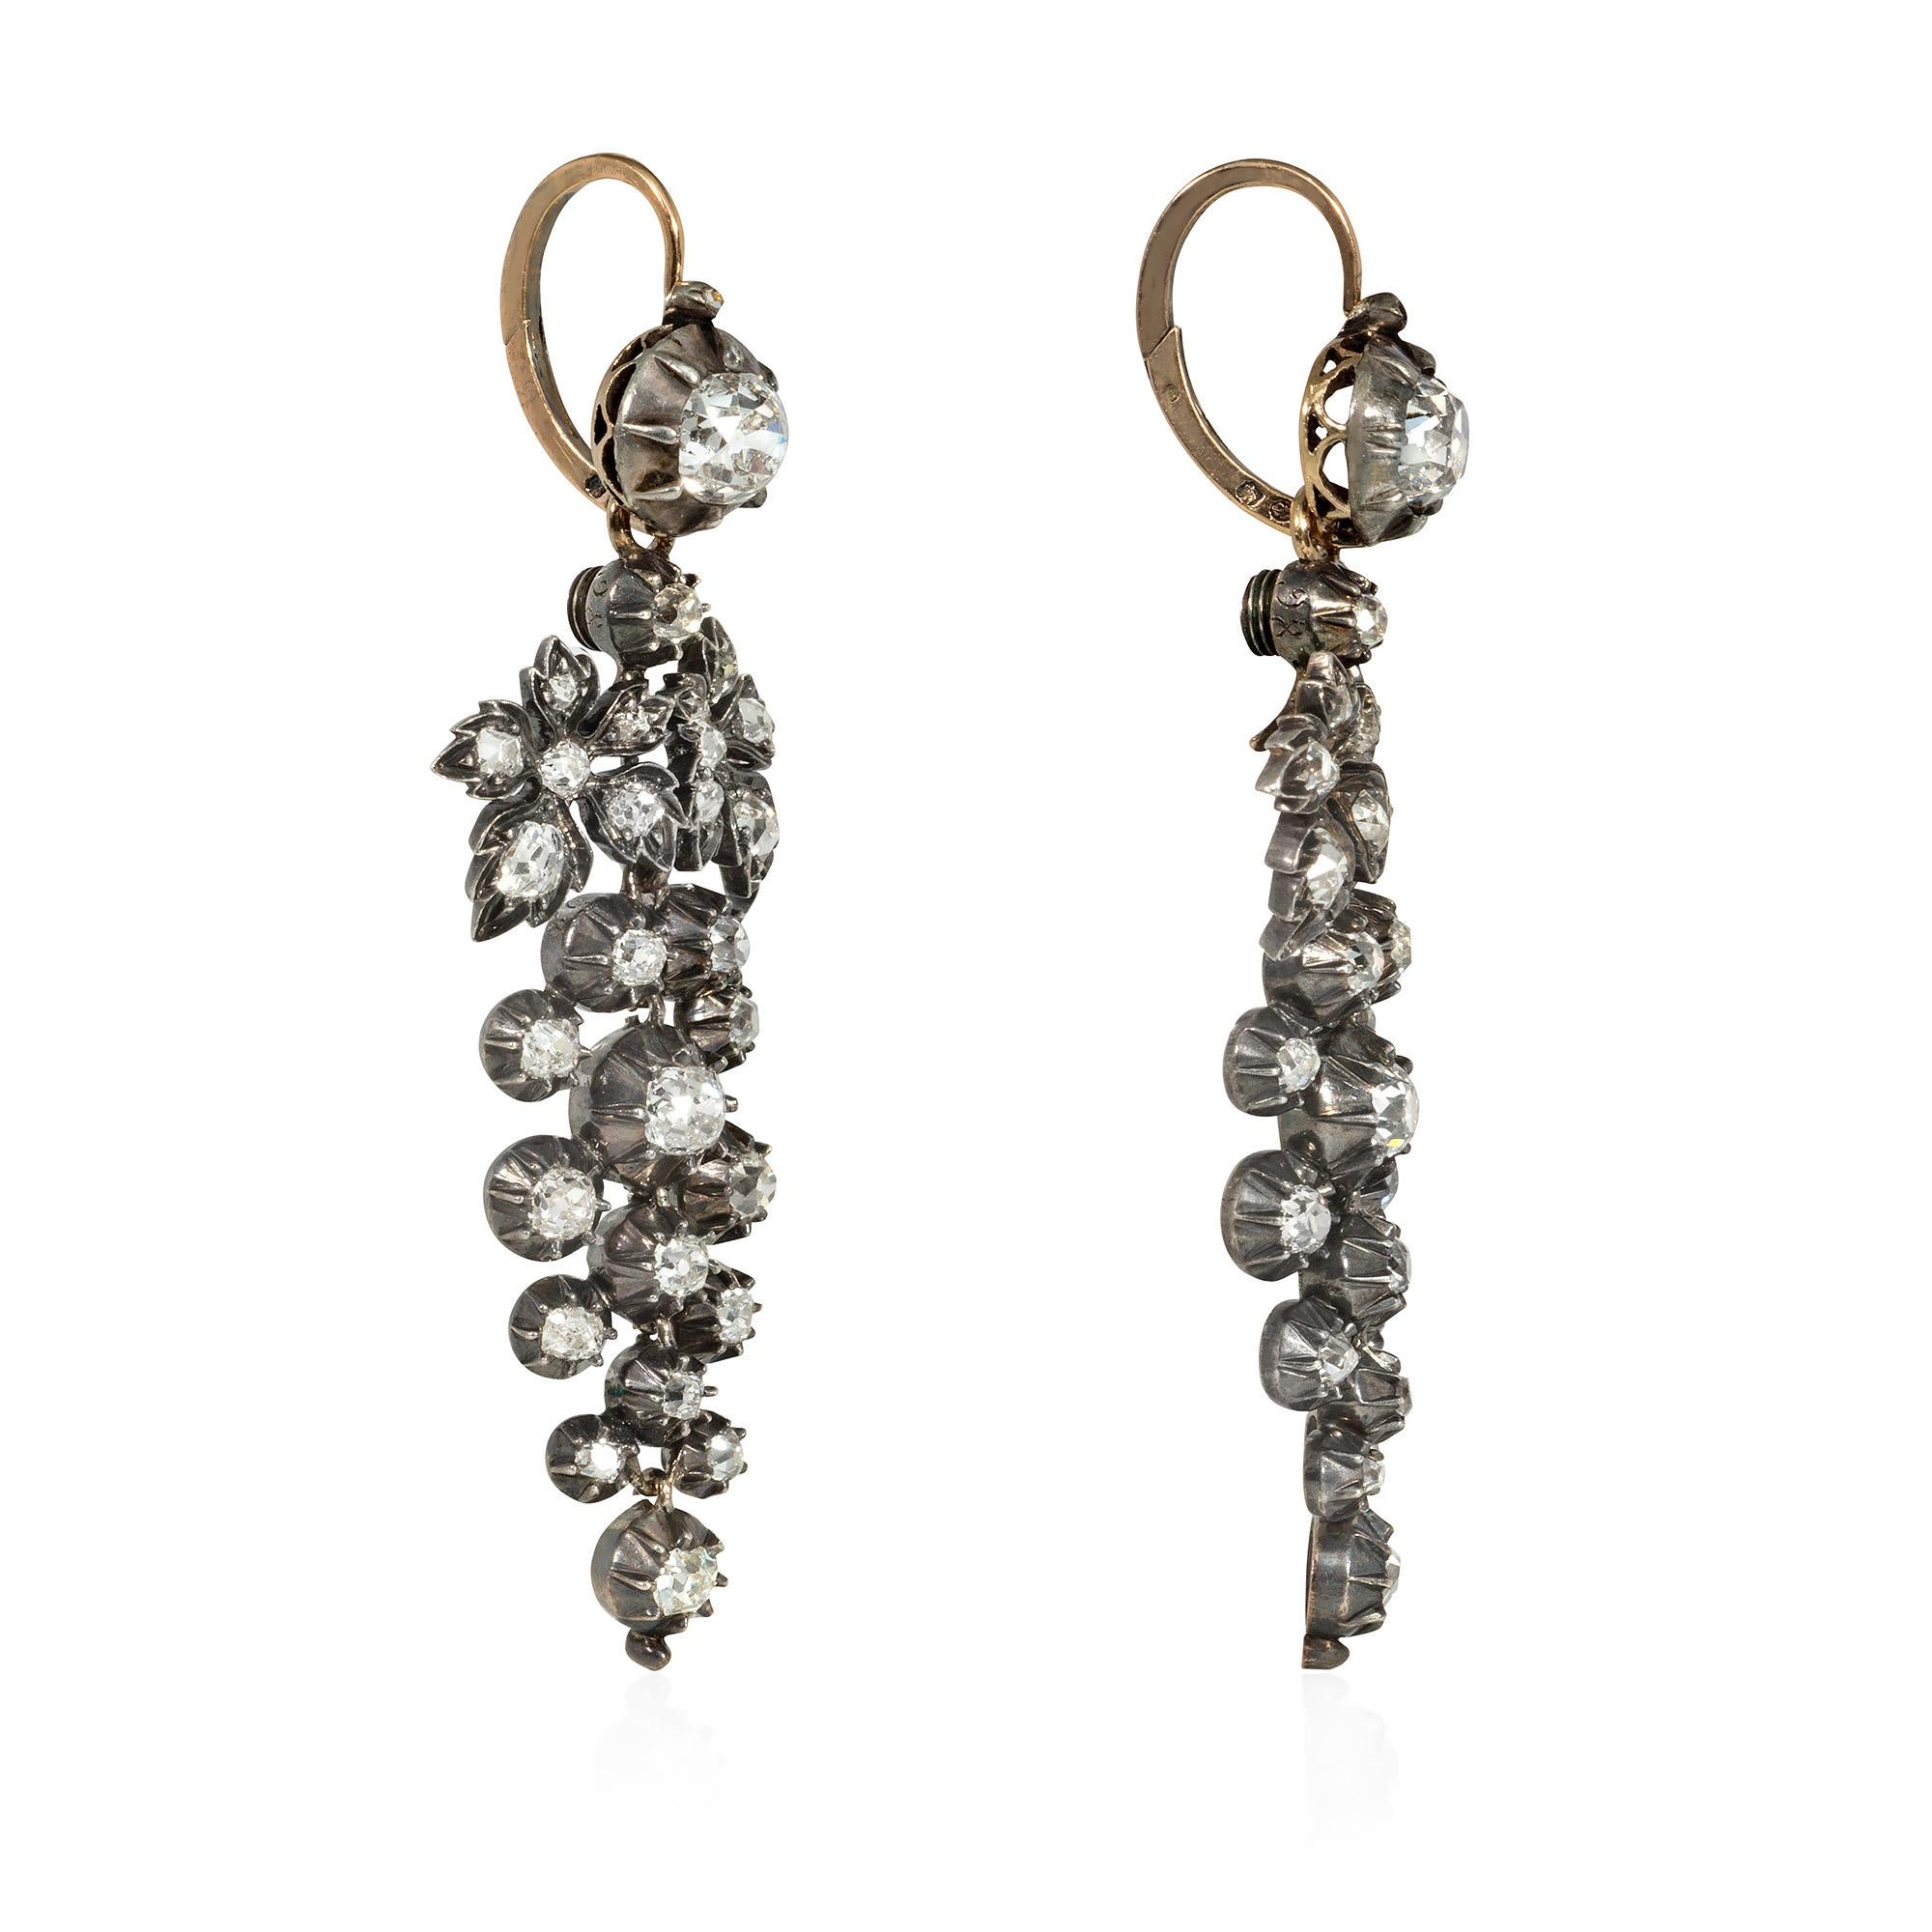 A pair of antique Victorian period day-to-night old mine cut diamond earrings with solitaire tops suspending removable articulated pendants designed as clusters of hanging grapes, in sterling silver and 18k gold.  Atw 5.00 cts. (tops approximately